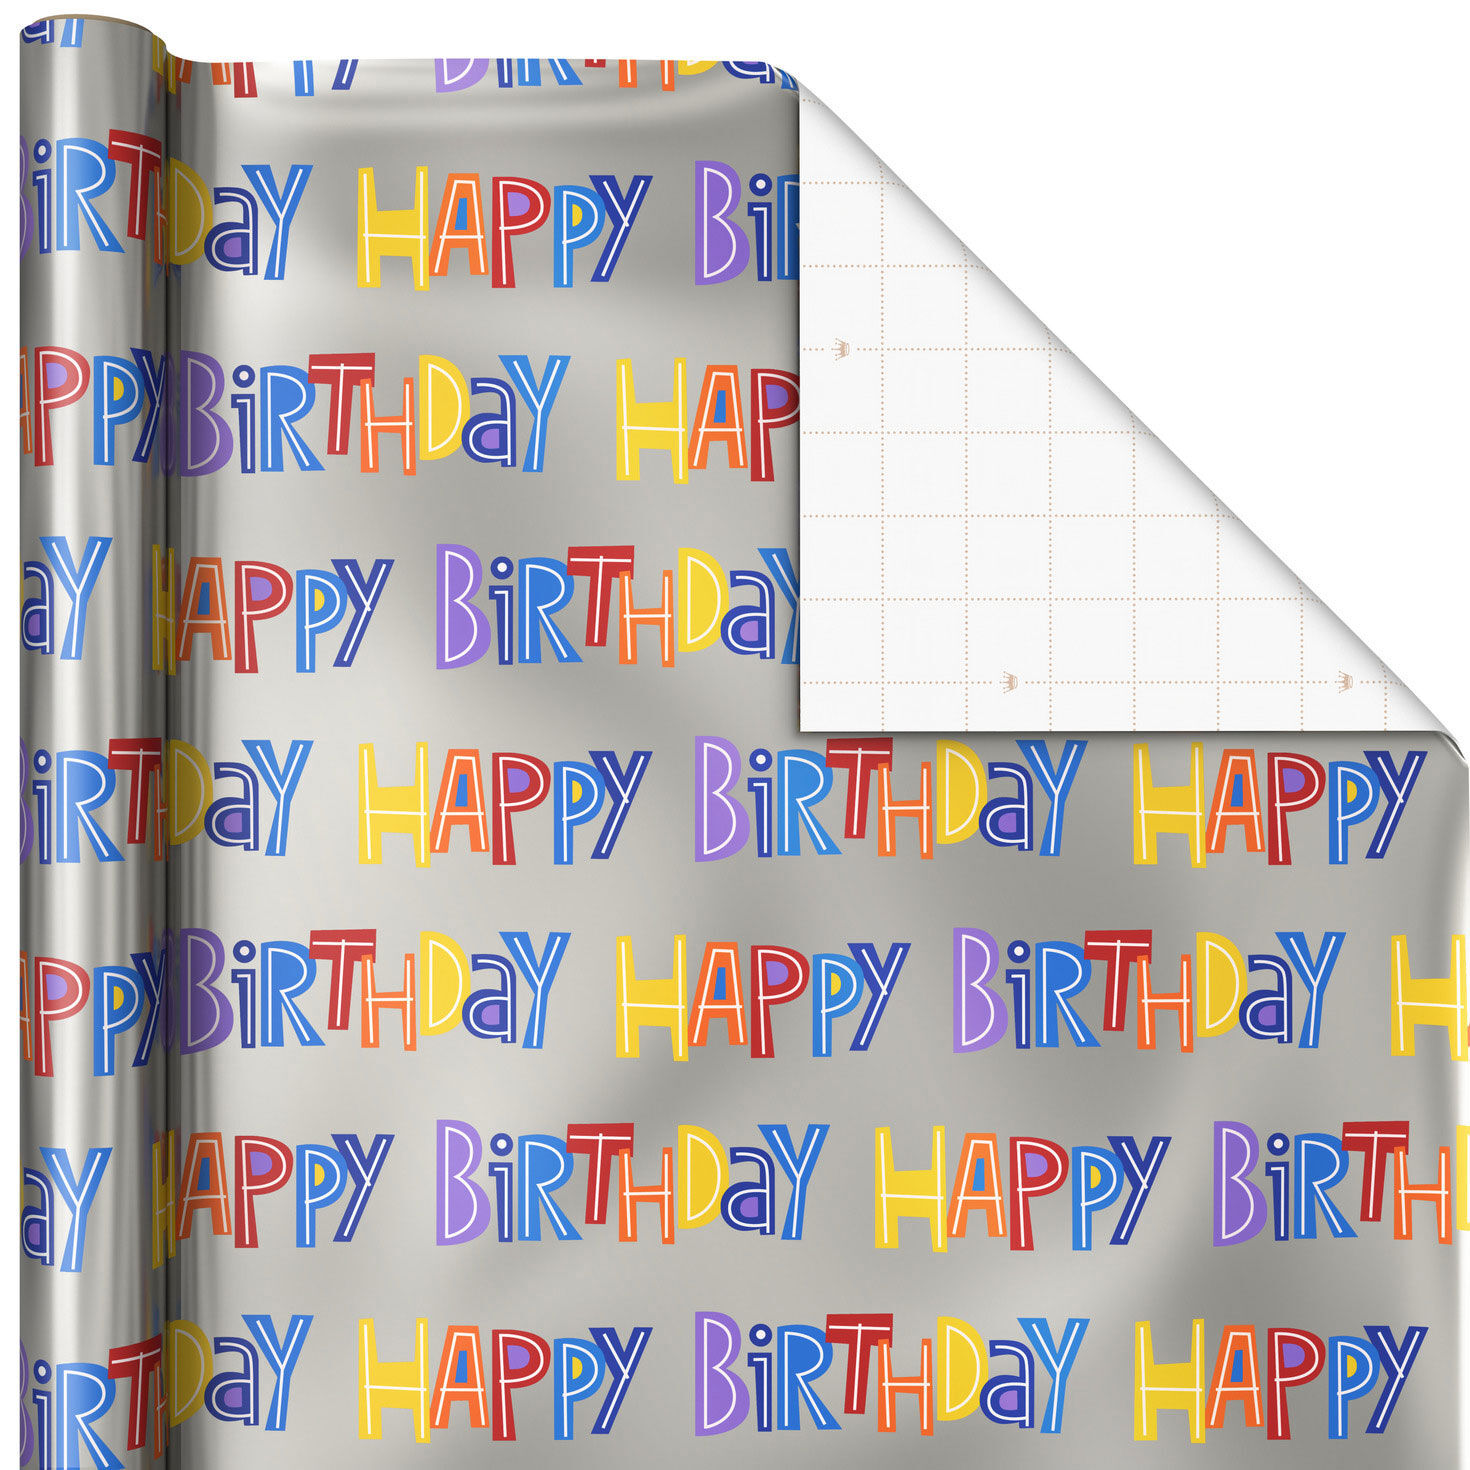 Pack of 8 30 in x 5 Ft Roll Gift Wrap Paper w/ Ribbon 